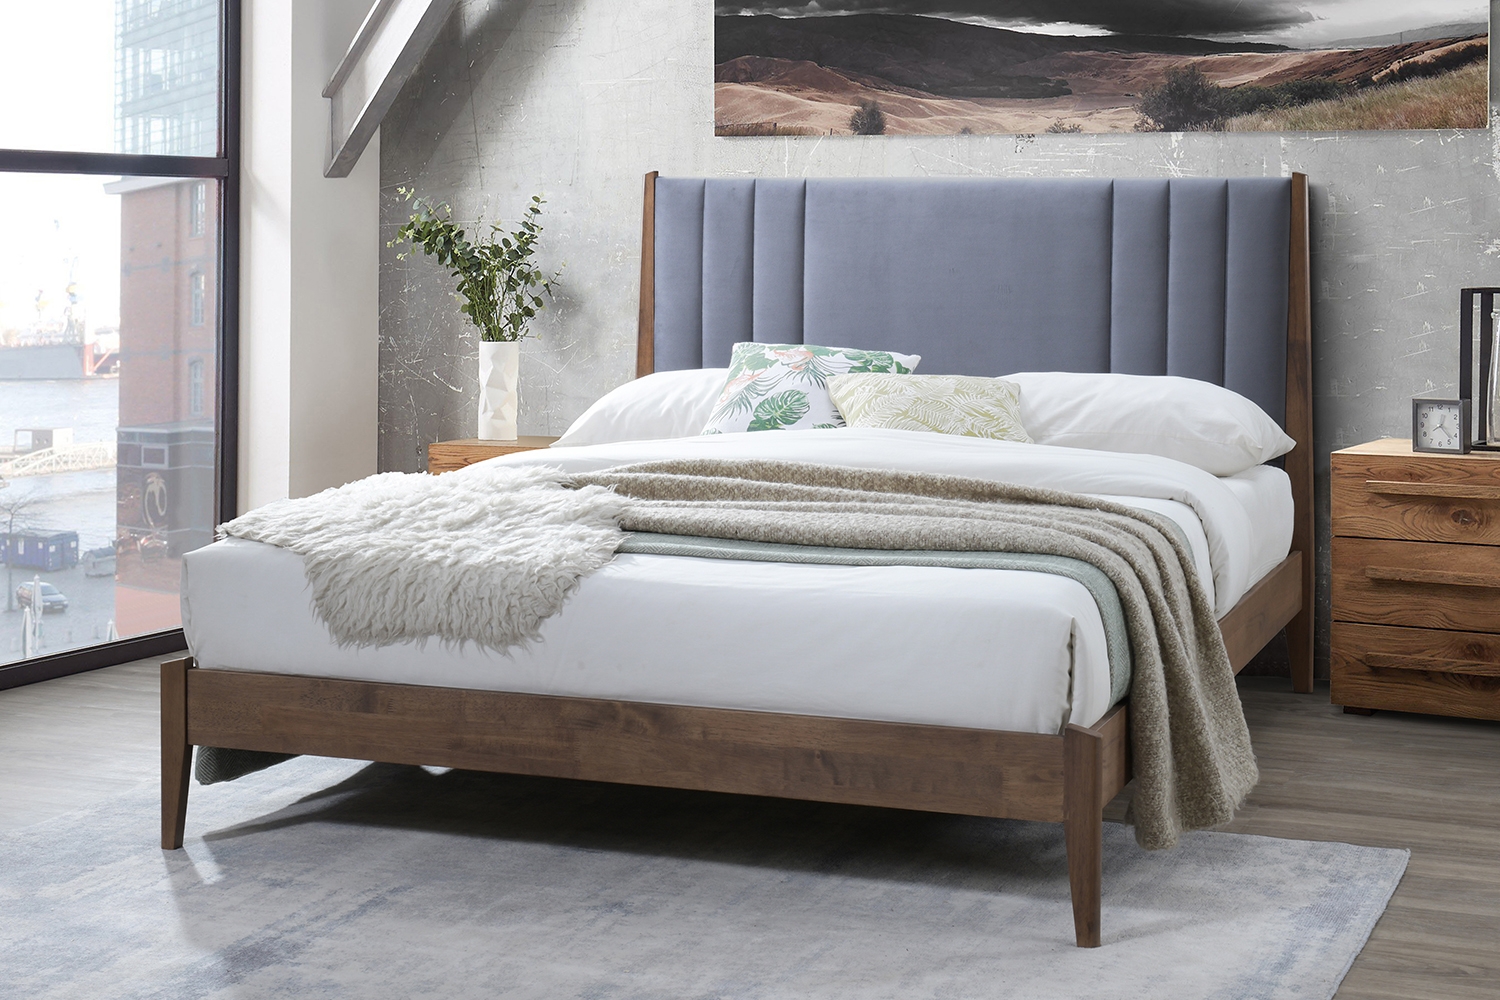 how to attach headboard to bed frame